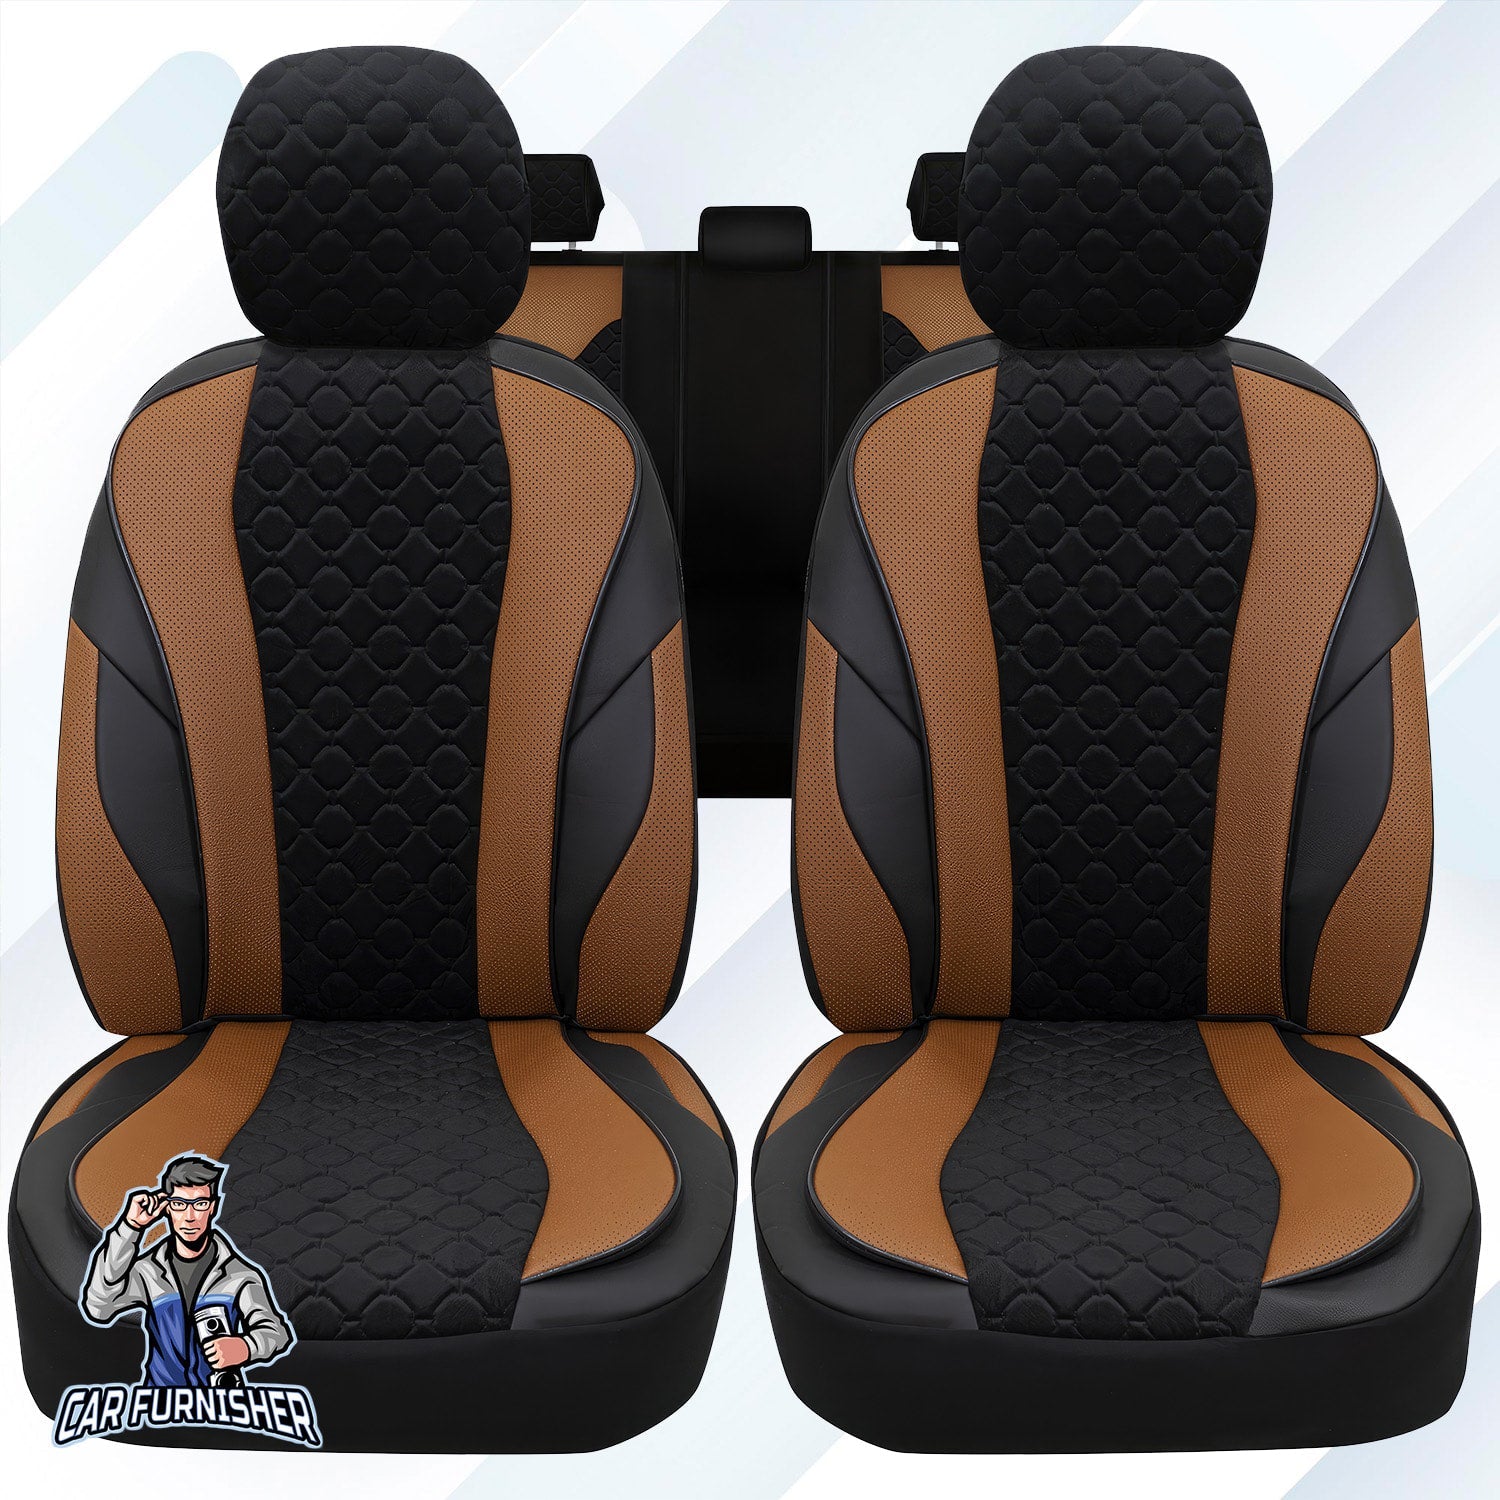 Mercedes 190 Seat Covers VIP Design Black 5 Seats + Headrests (Full Set) Leather & Foal Feather Fabric